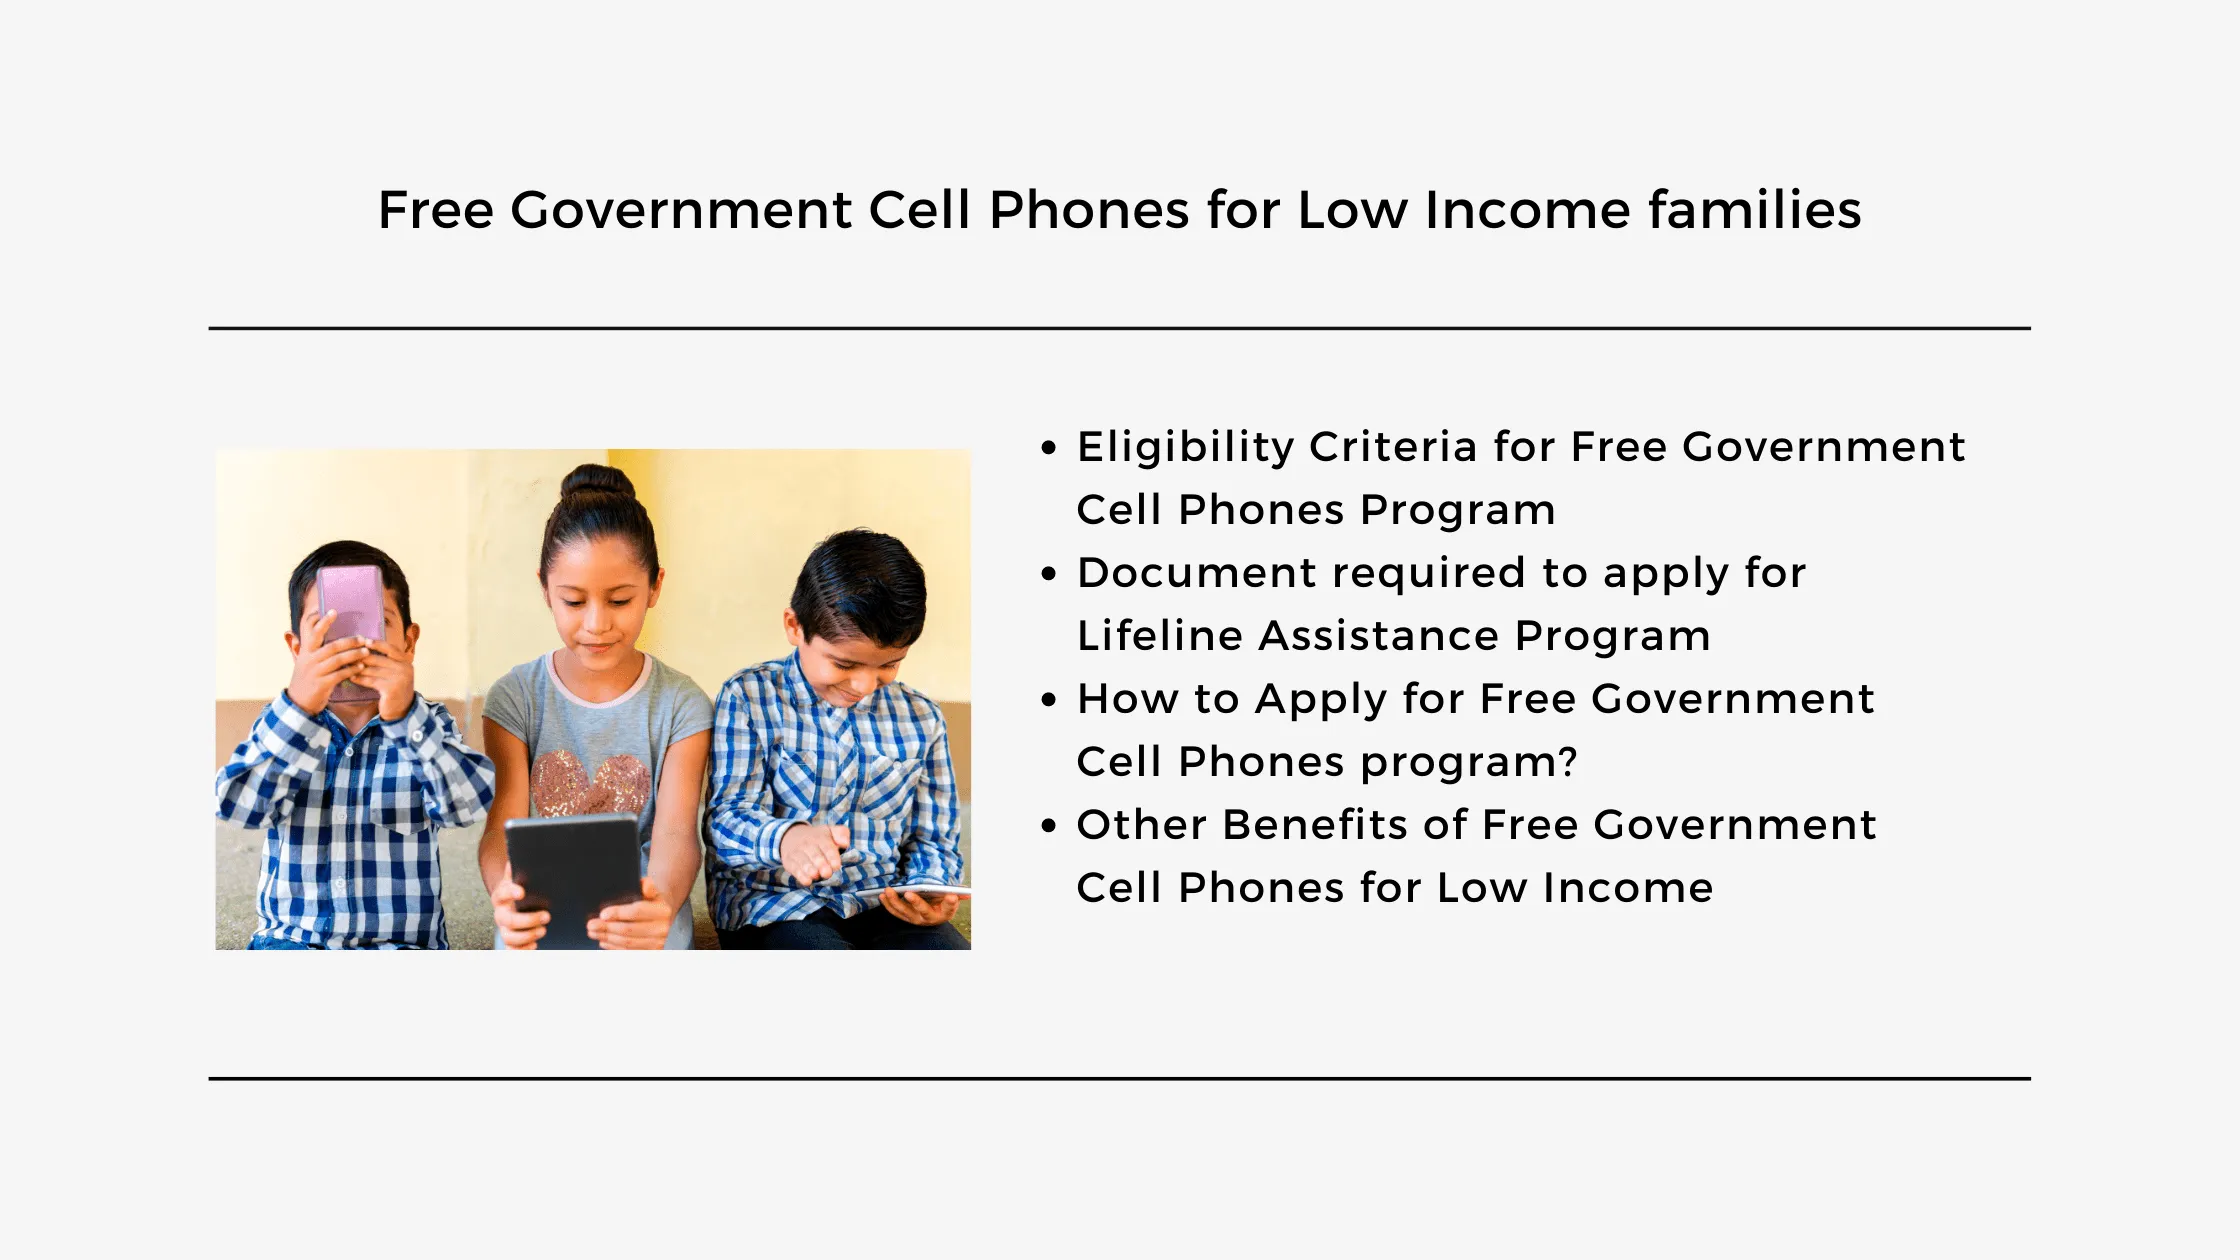 Free Government Cell Phones for Low Income families